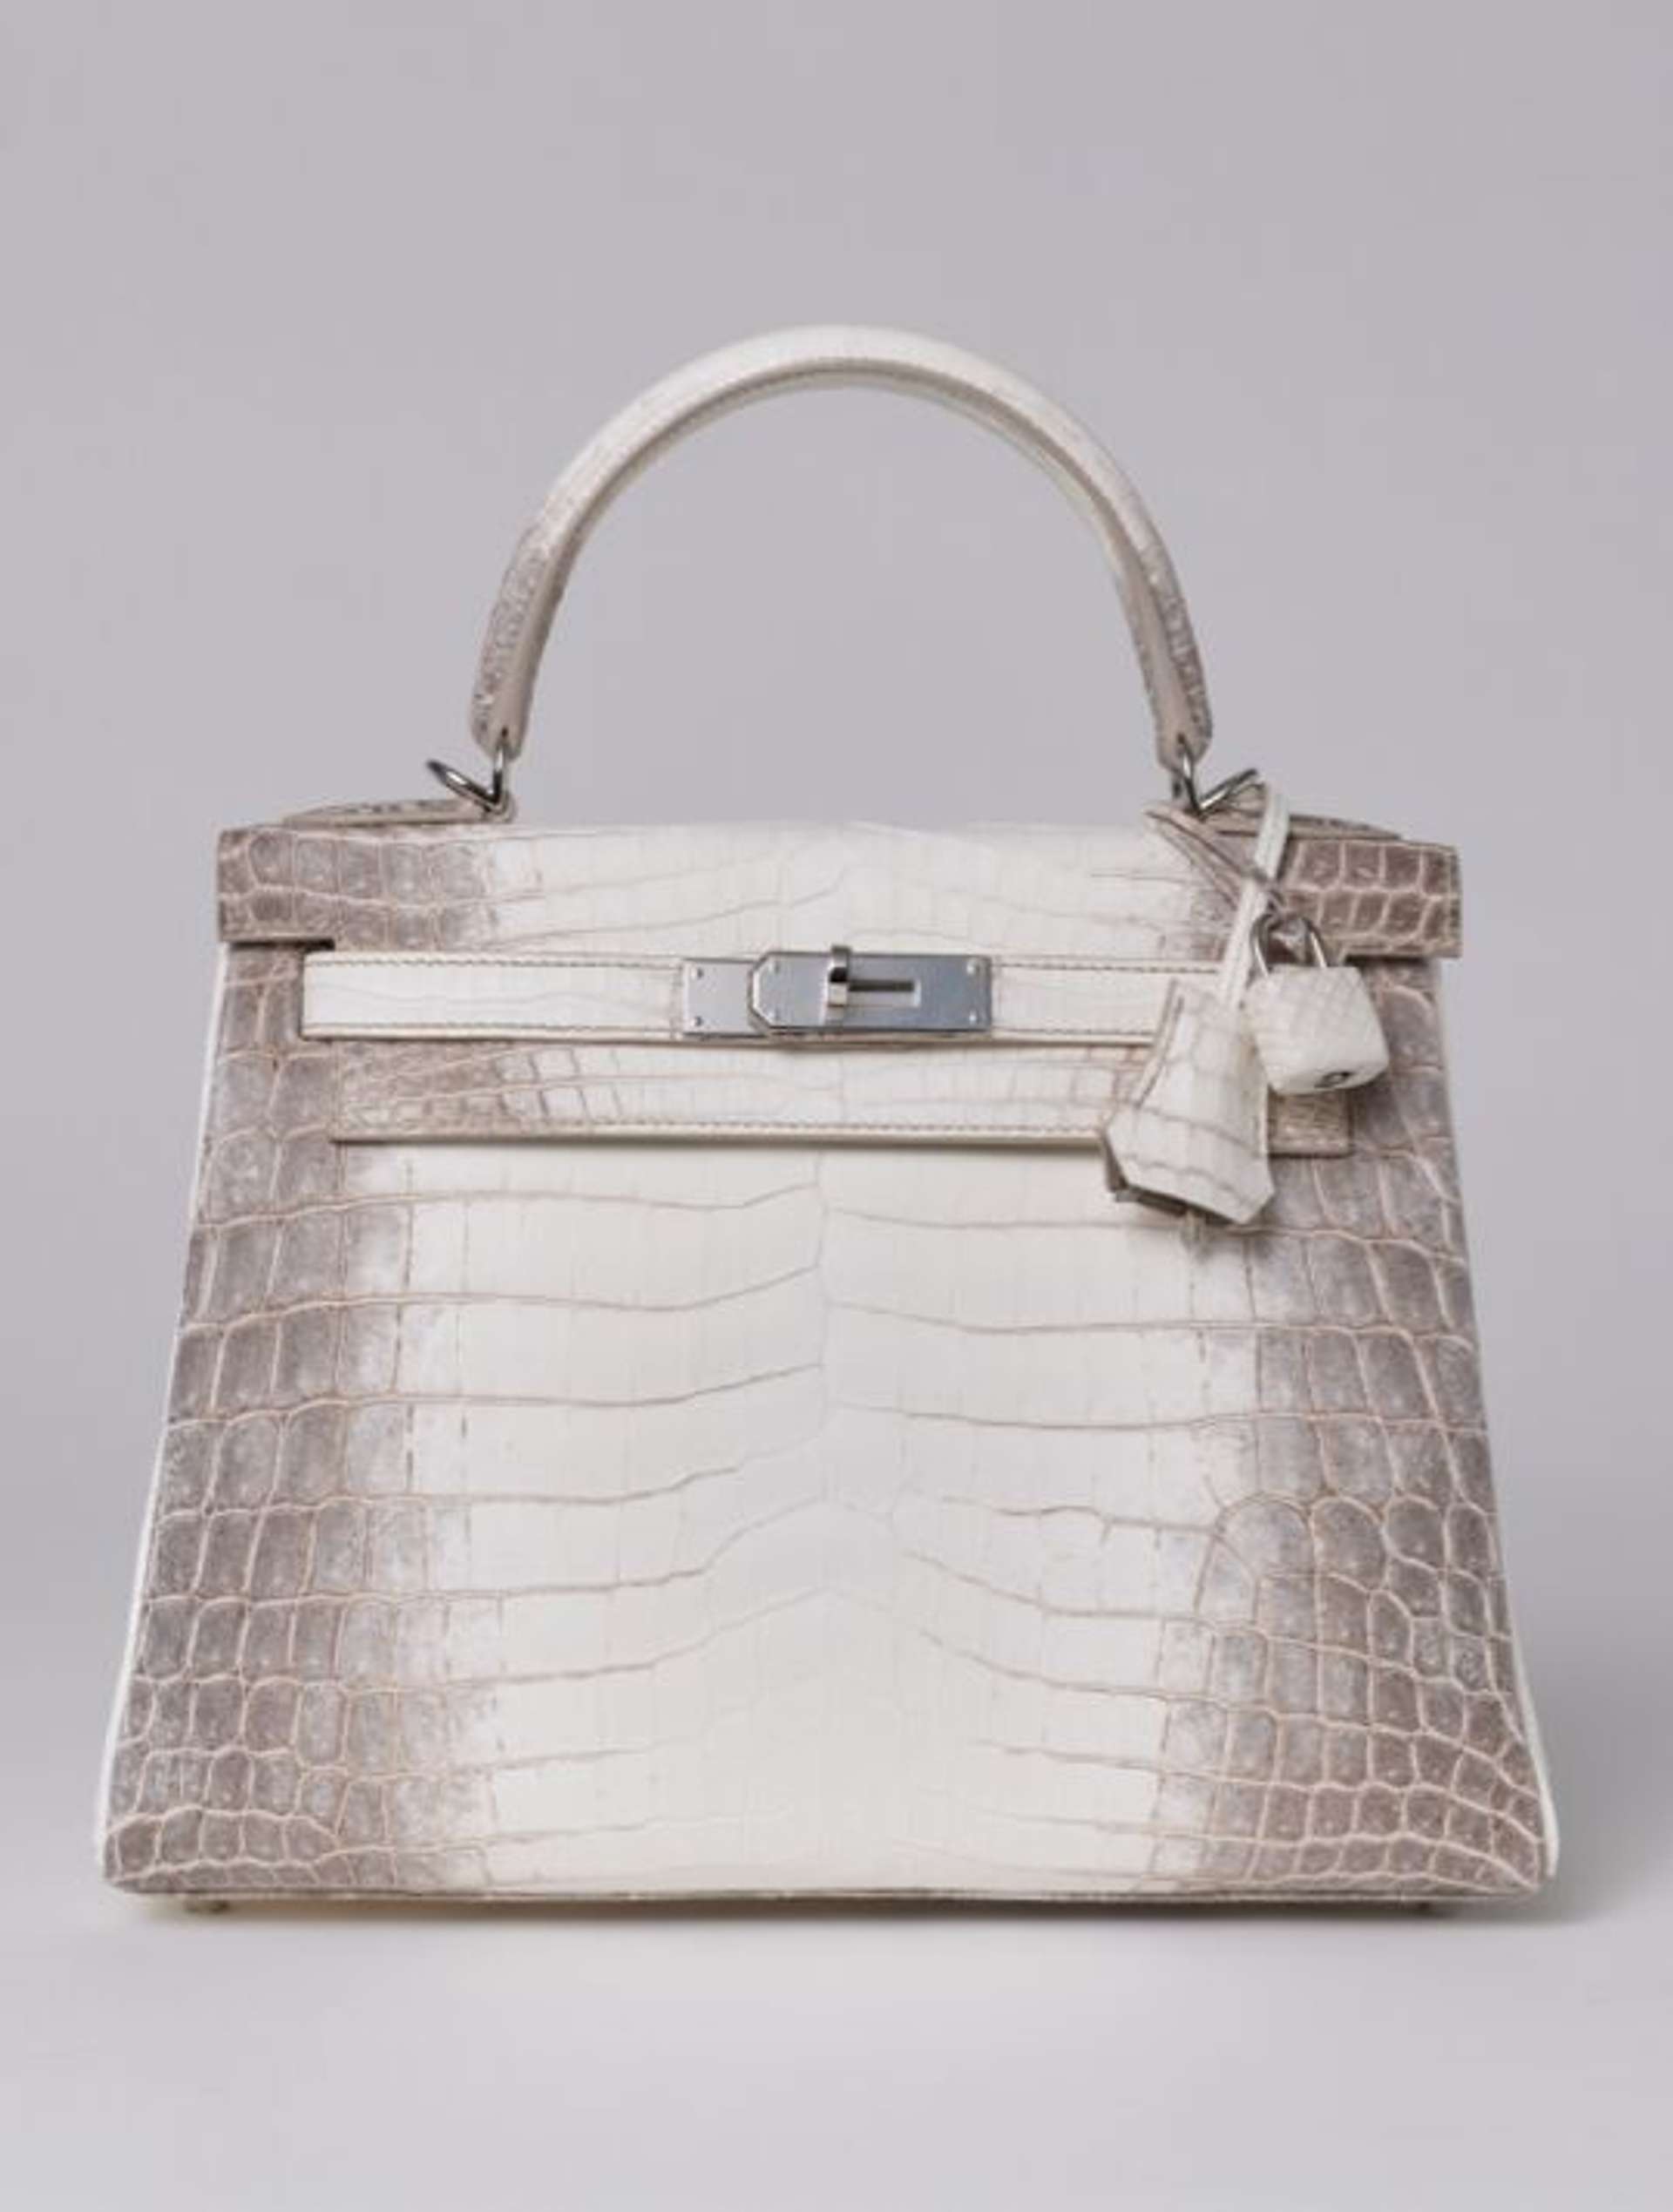 Louis Vuitton Blue And White Gradient Bella Bag Silver Hardware, 2021  Available For Immediate Sale At Sotheby's